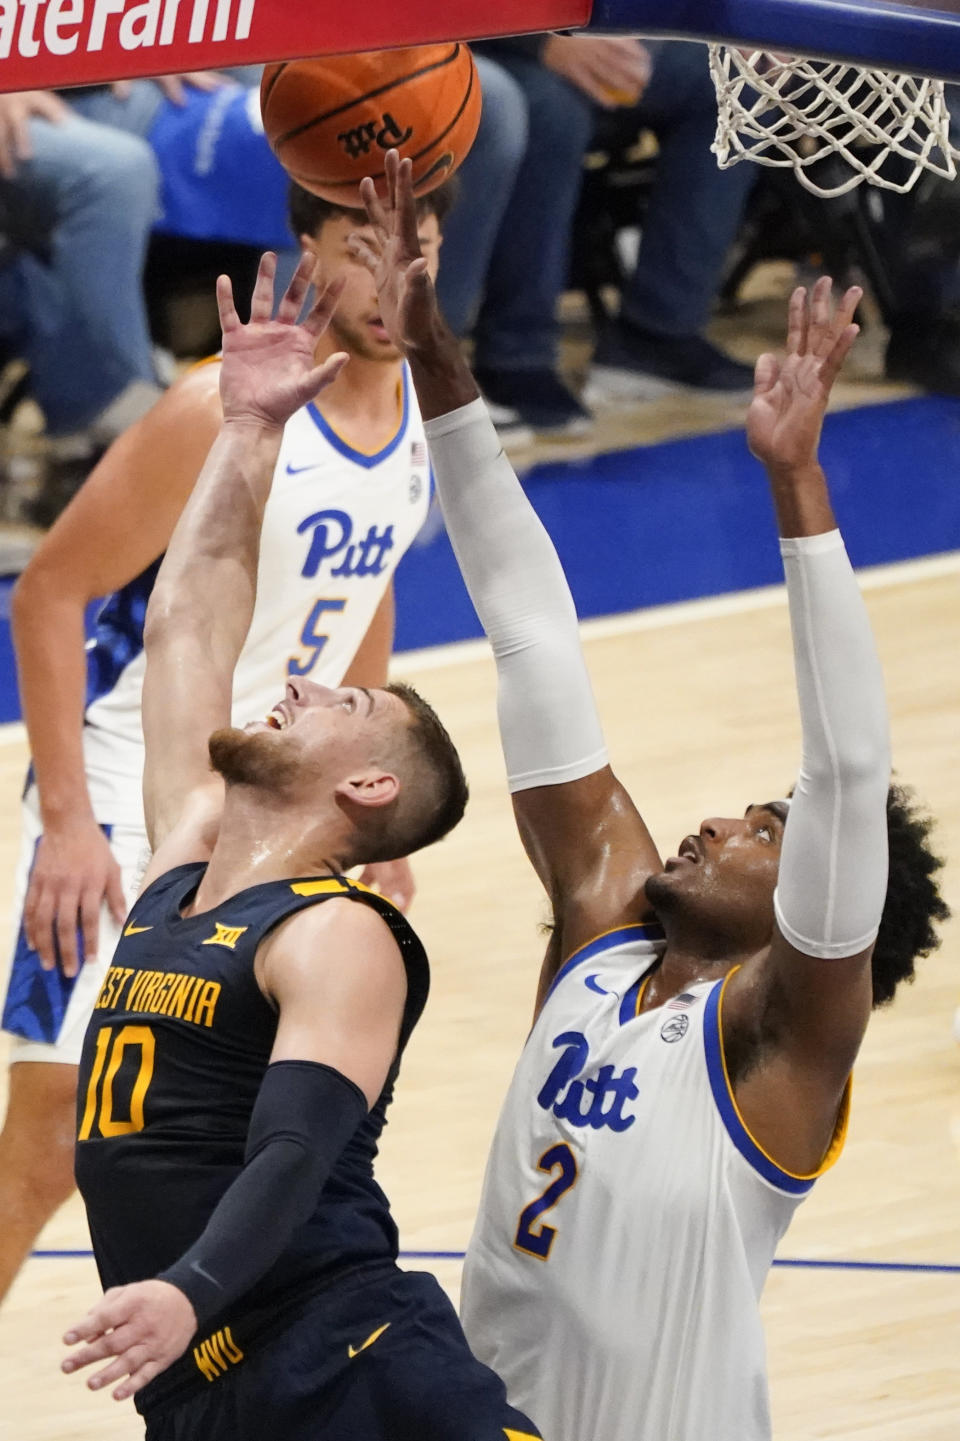 West Virginia's Erik Stevenson (10) scores in front of Pittsburgh's Blake Hinson (2) during the second half of an NCAA college basketball game, Friday, Nov. 11, 2022, in Pittsburgh. (AP Photo/Keith Srakocic)